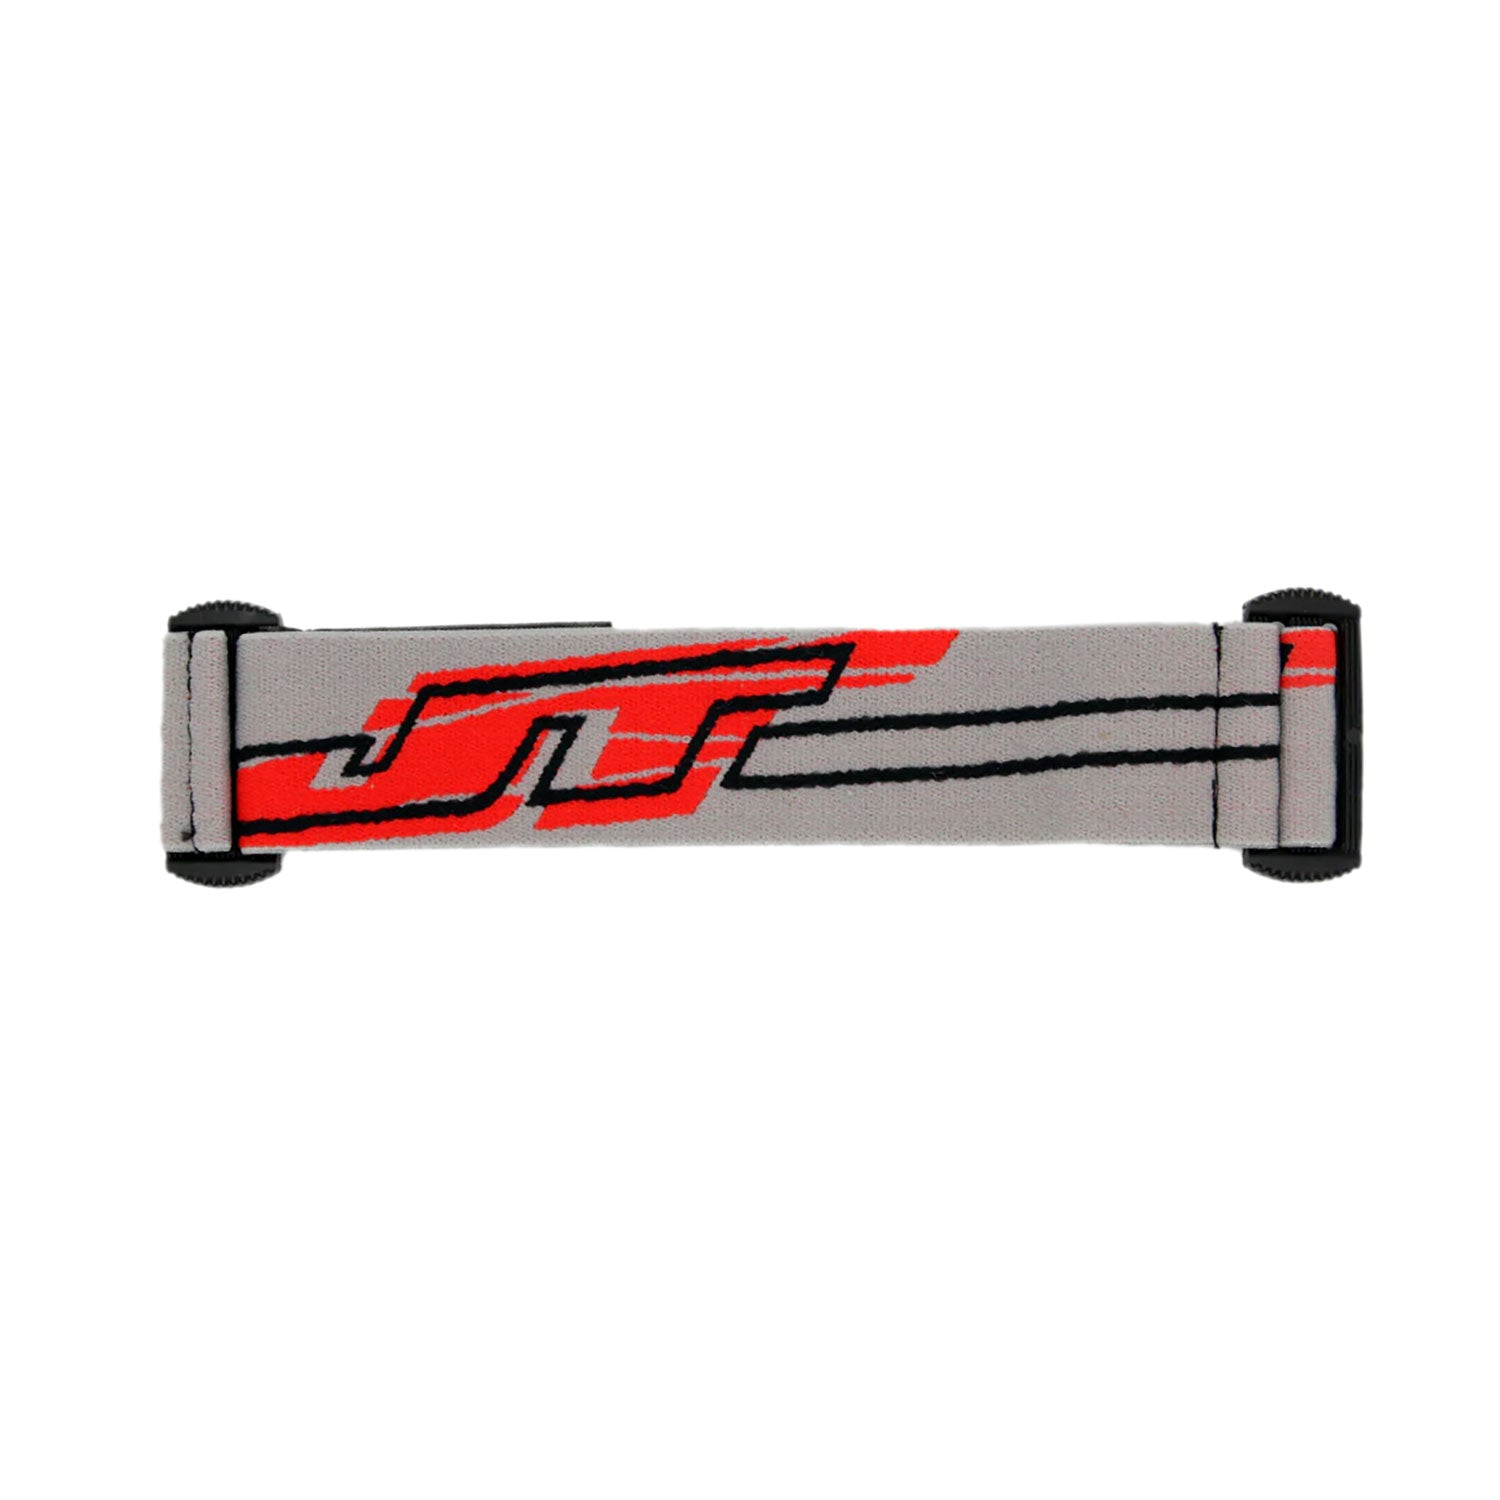 JT Spectra Proflex LE Strap - Gray/Red – Kore Outdoor Inc.